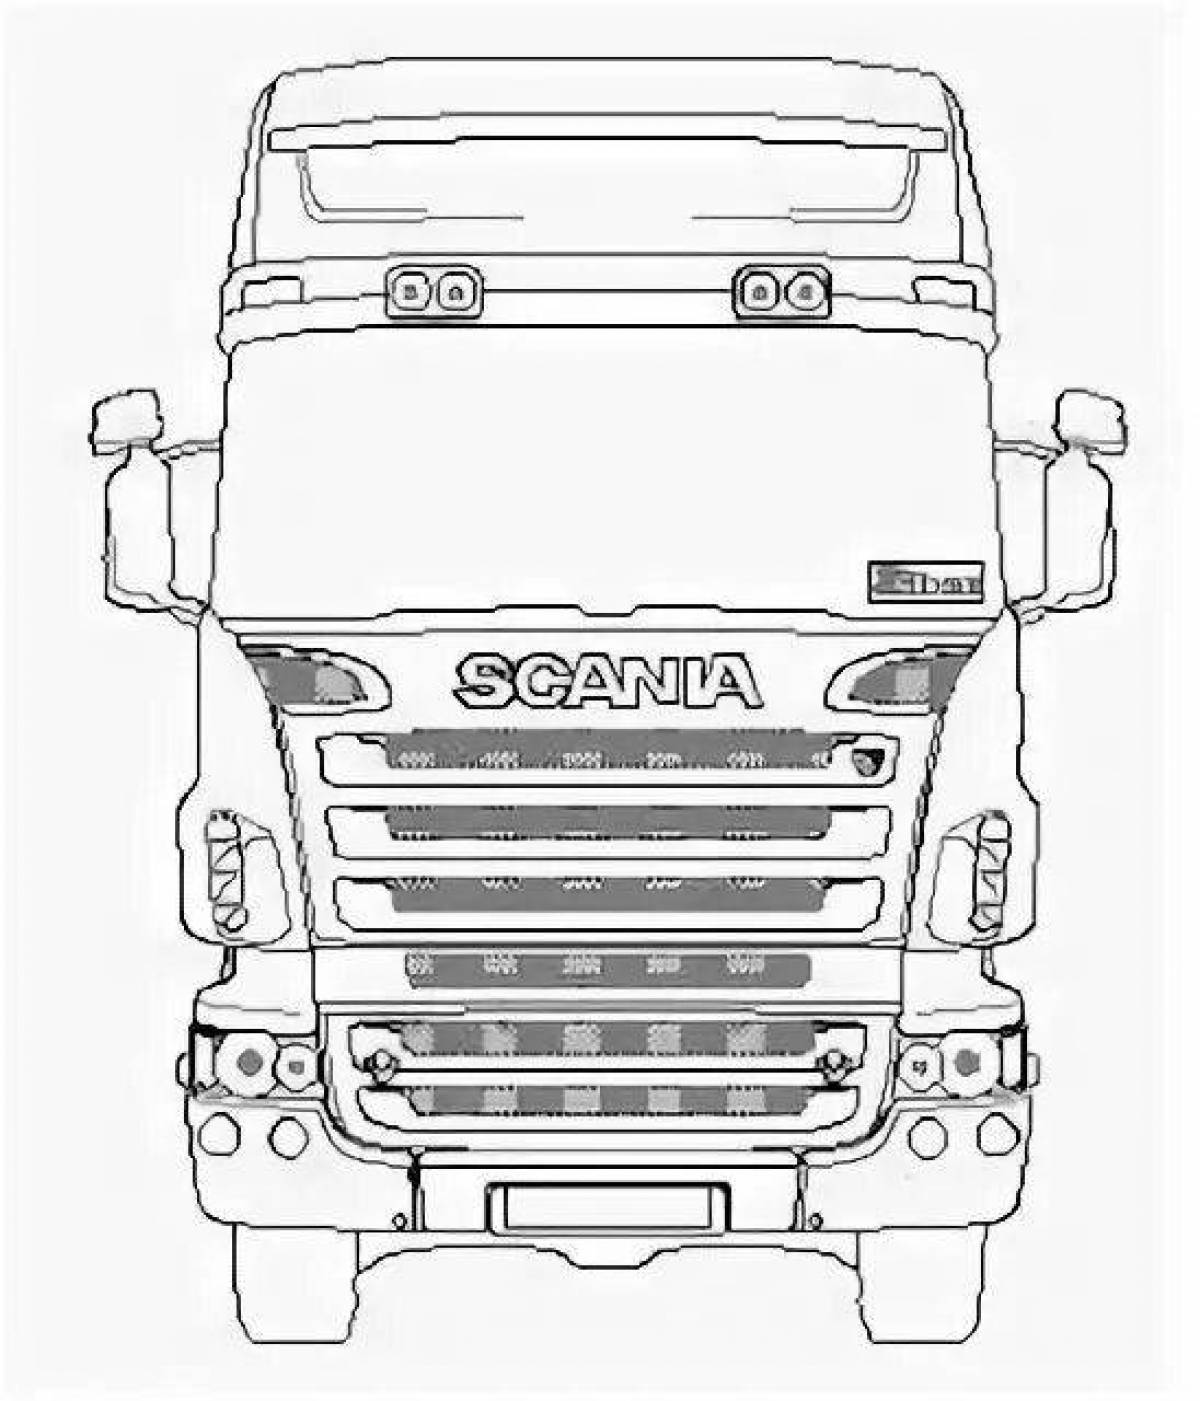 Intriguing scania coloring page